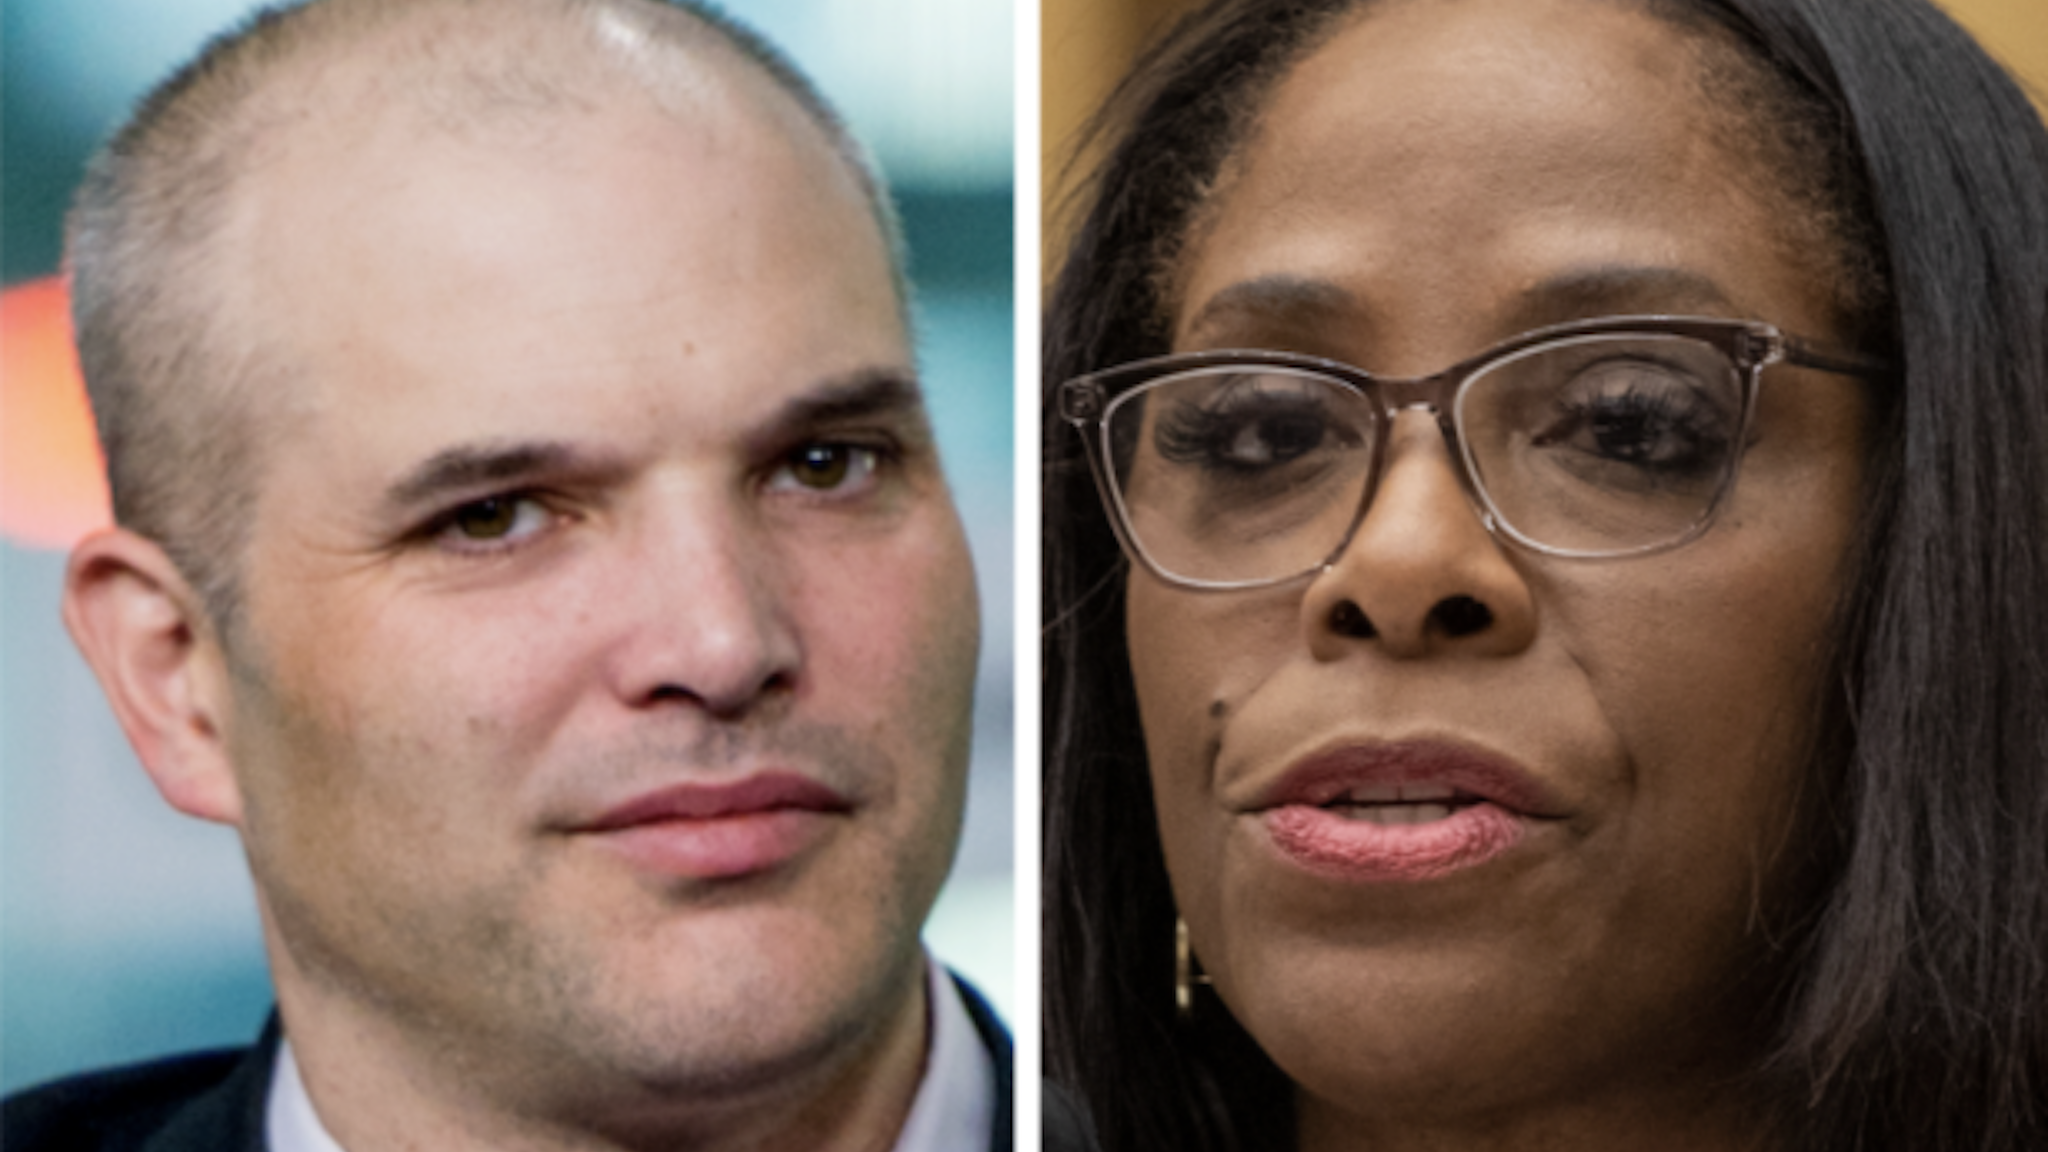 Matt Taibbi gave Rep. Stacey Plaskett, (D-VI) a piece of his mind and a portion of his resume after she mocked his credentials at a contentious Capitol Hill hearing